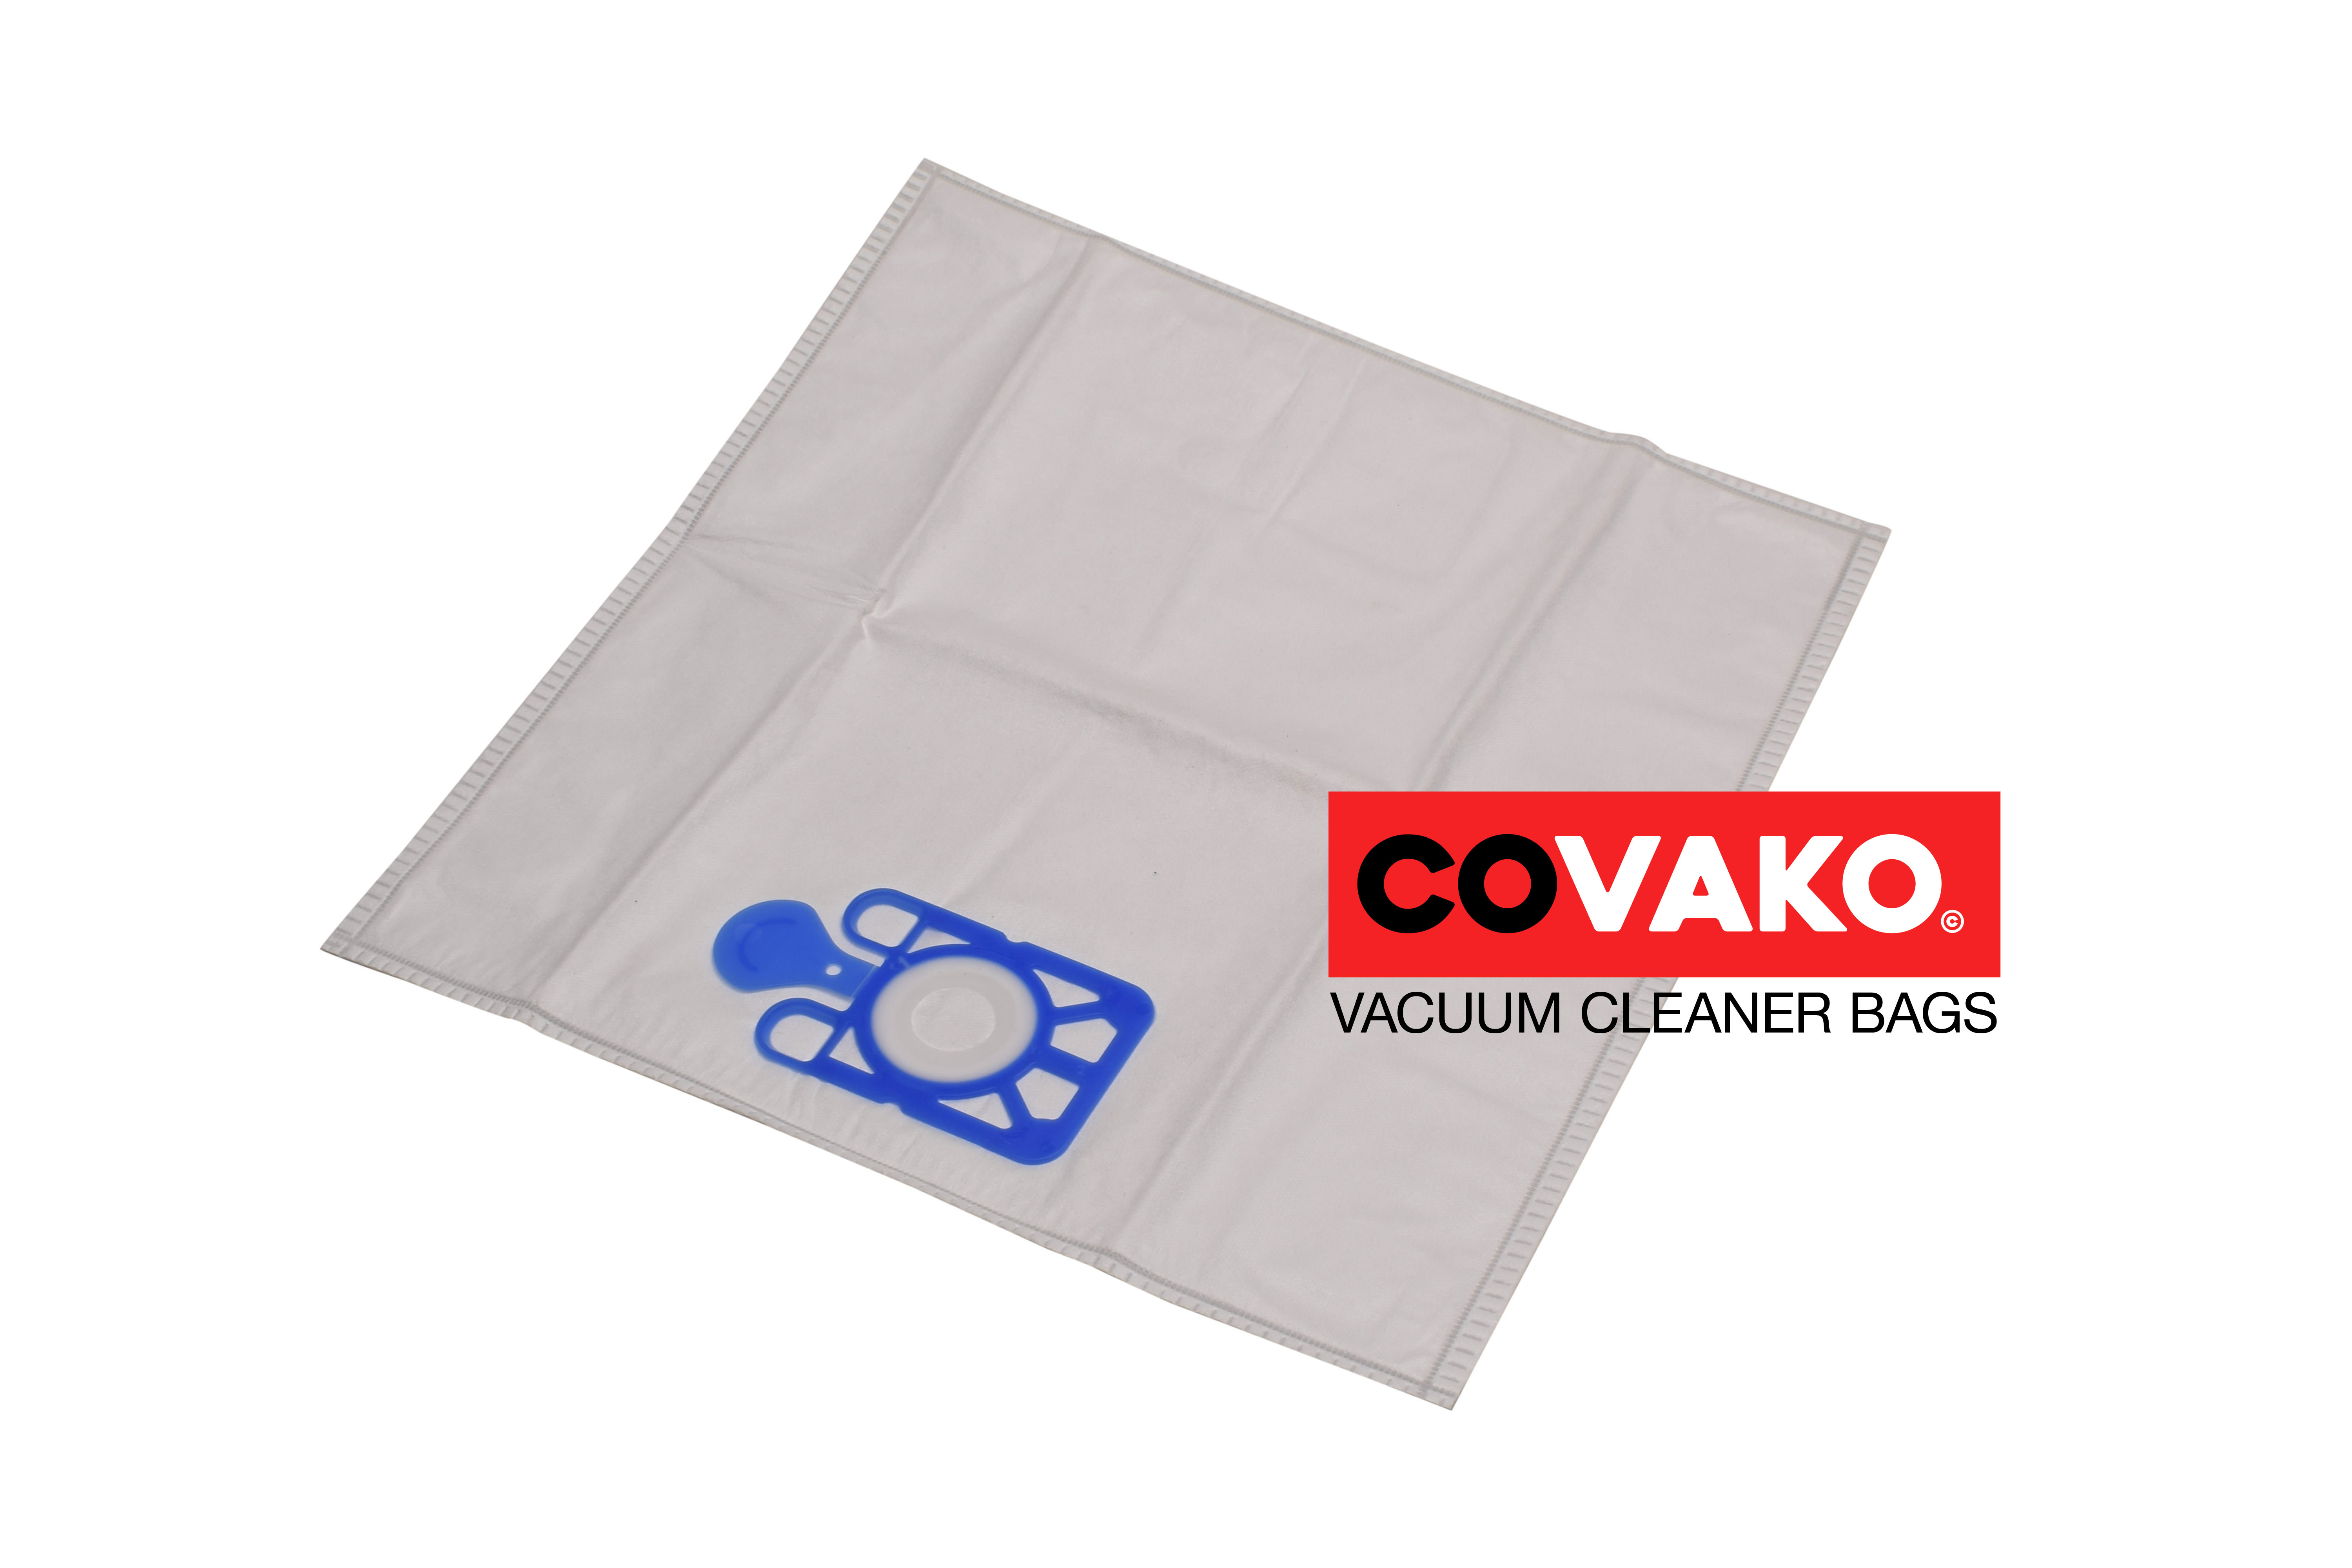 Viper GVD 10 / Synthesis - Viper vacuum cleaner bags